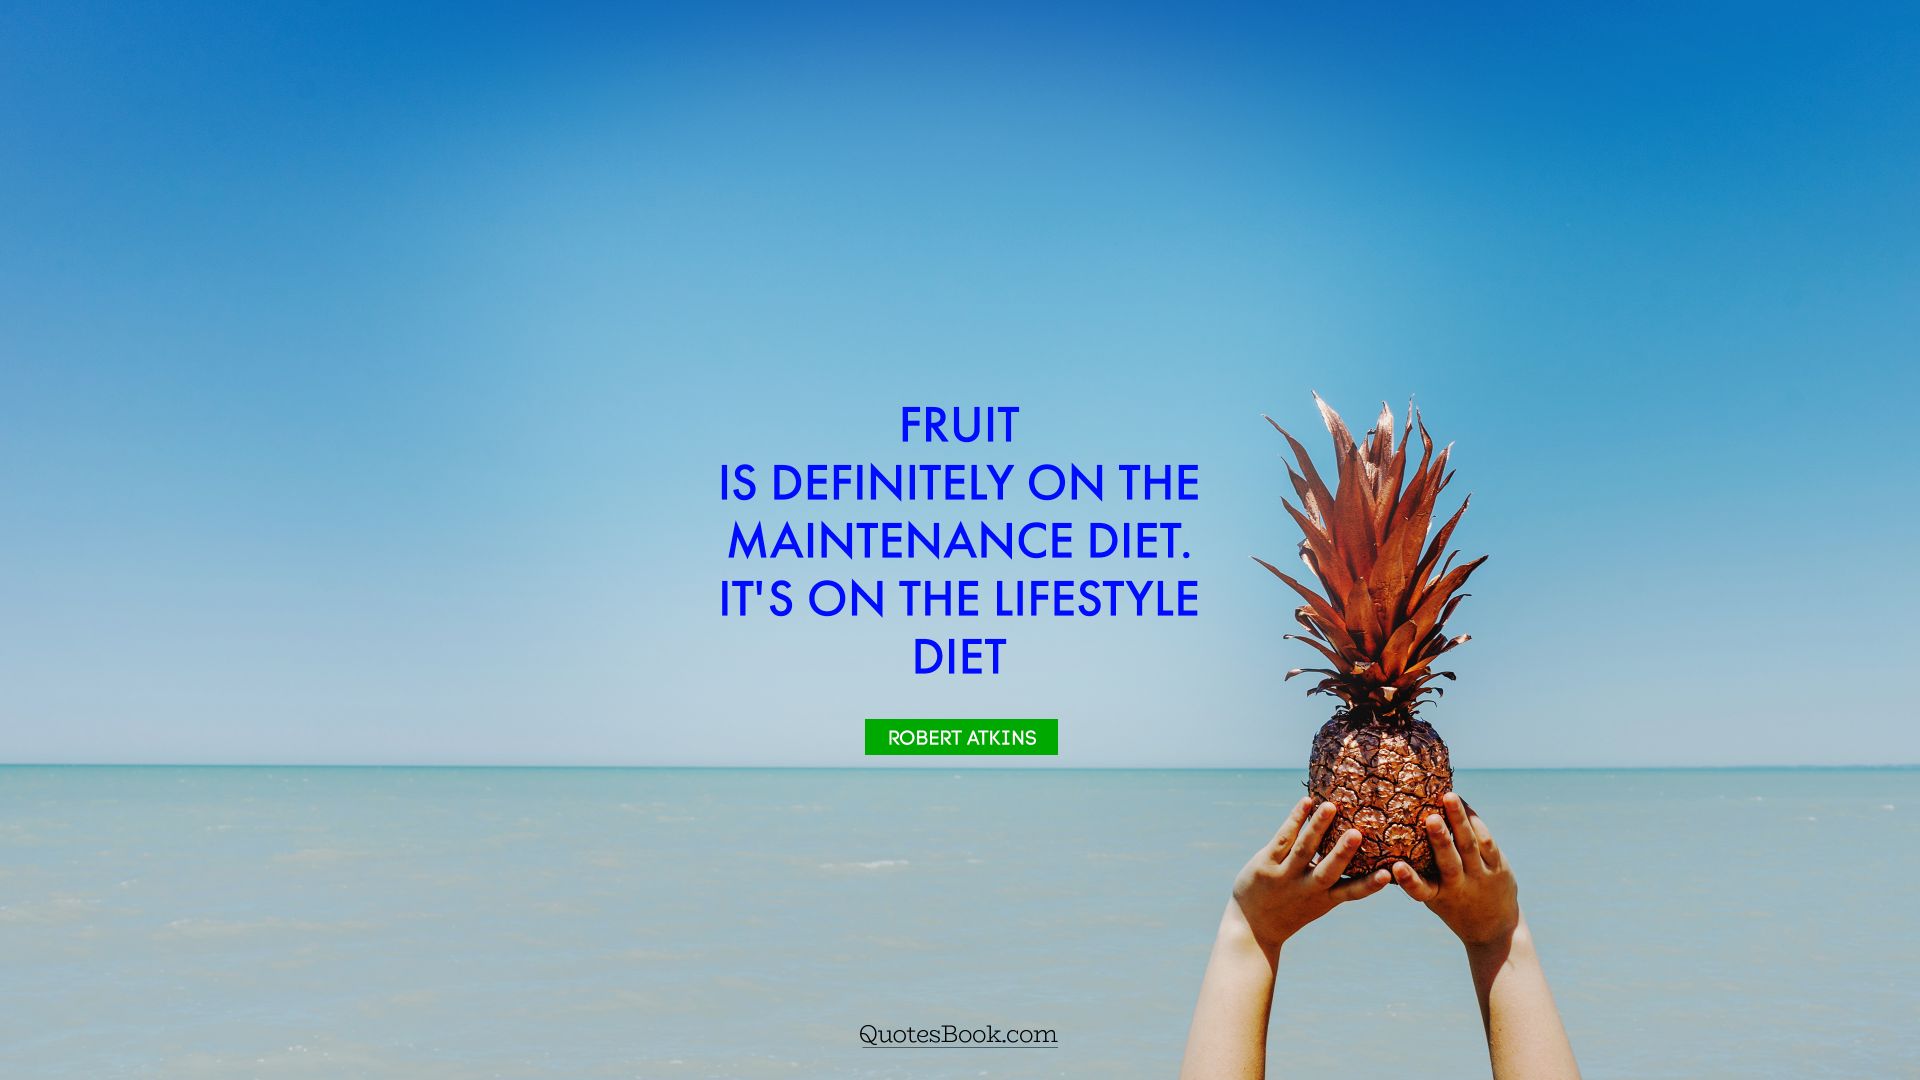 Fruit is definitely on the maintenance diet. It's on the lifestyle diet. - Quote by Robert Atkins